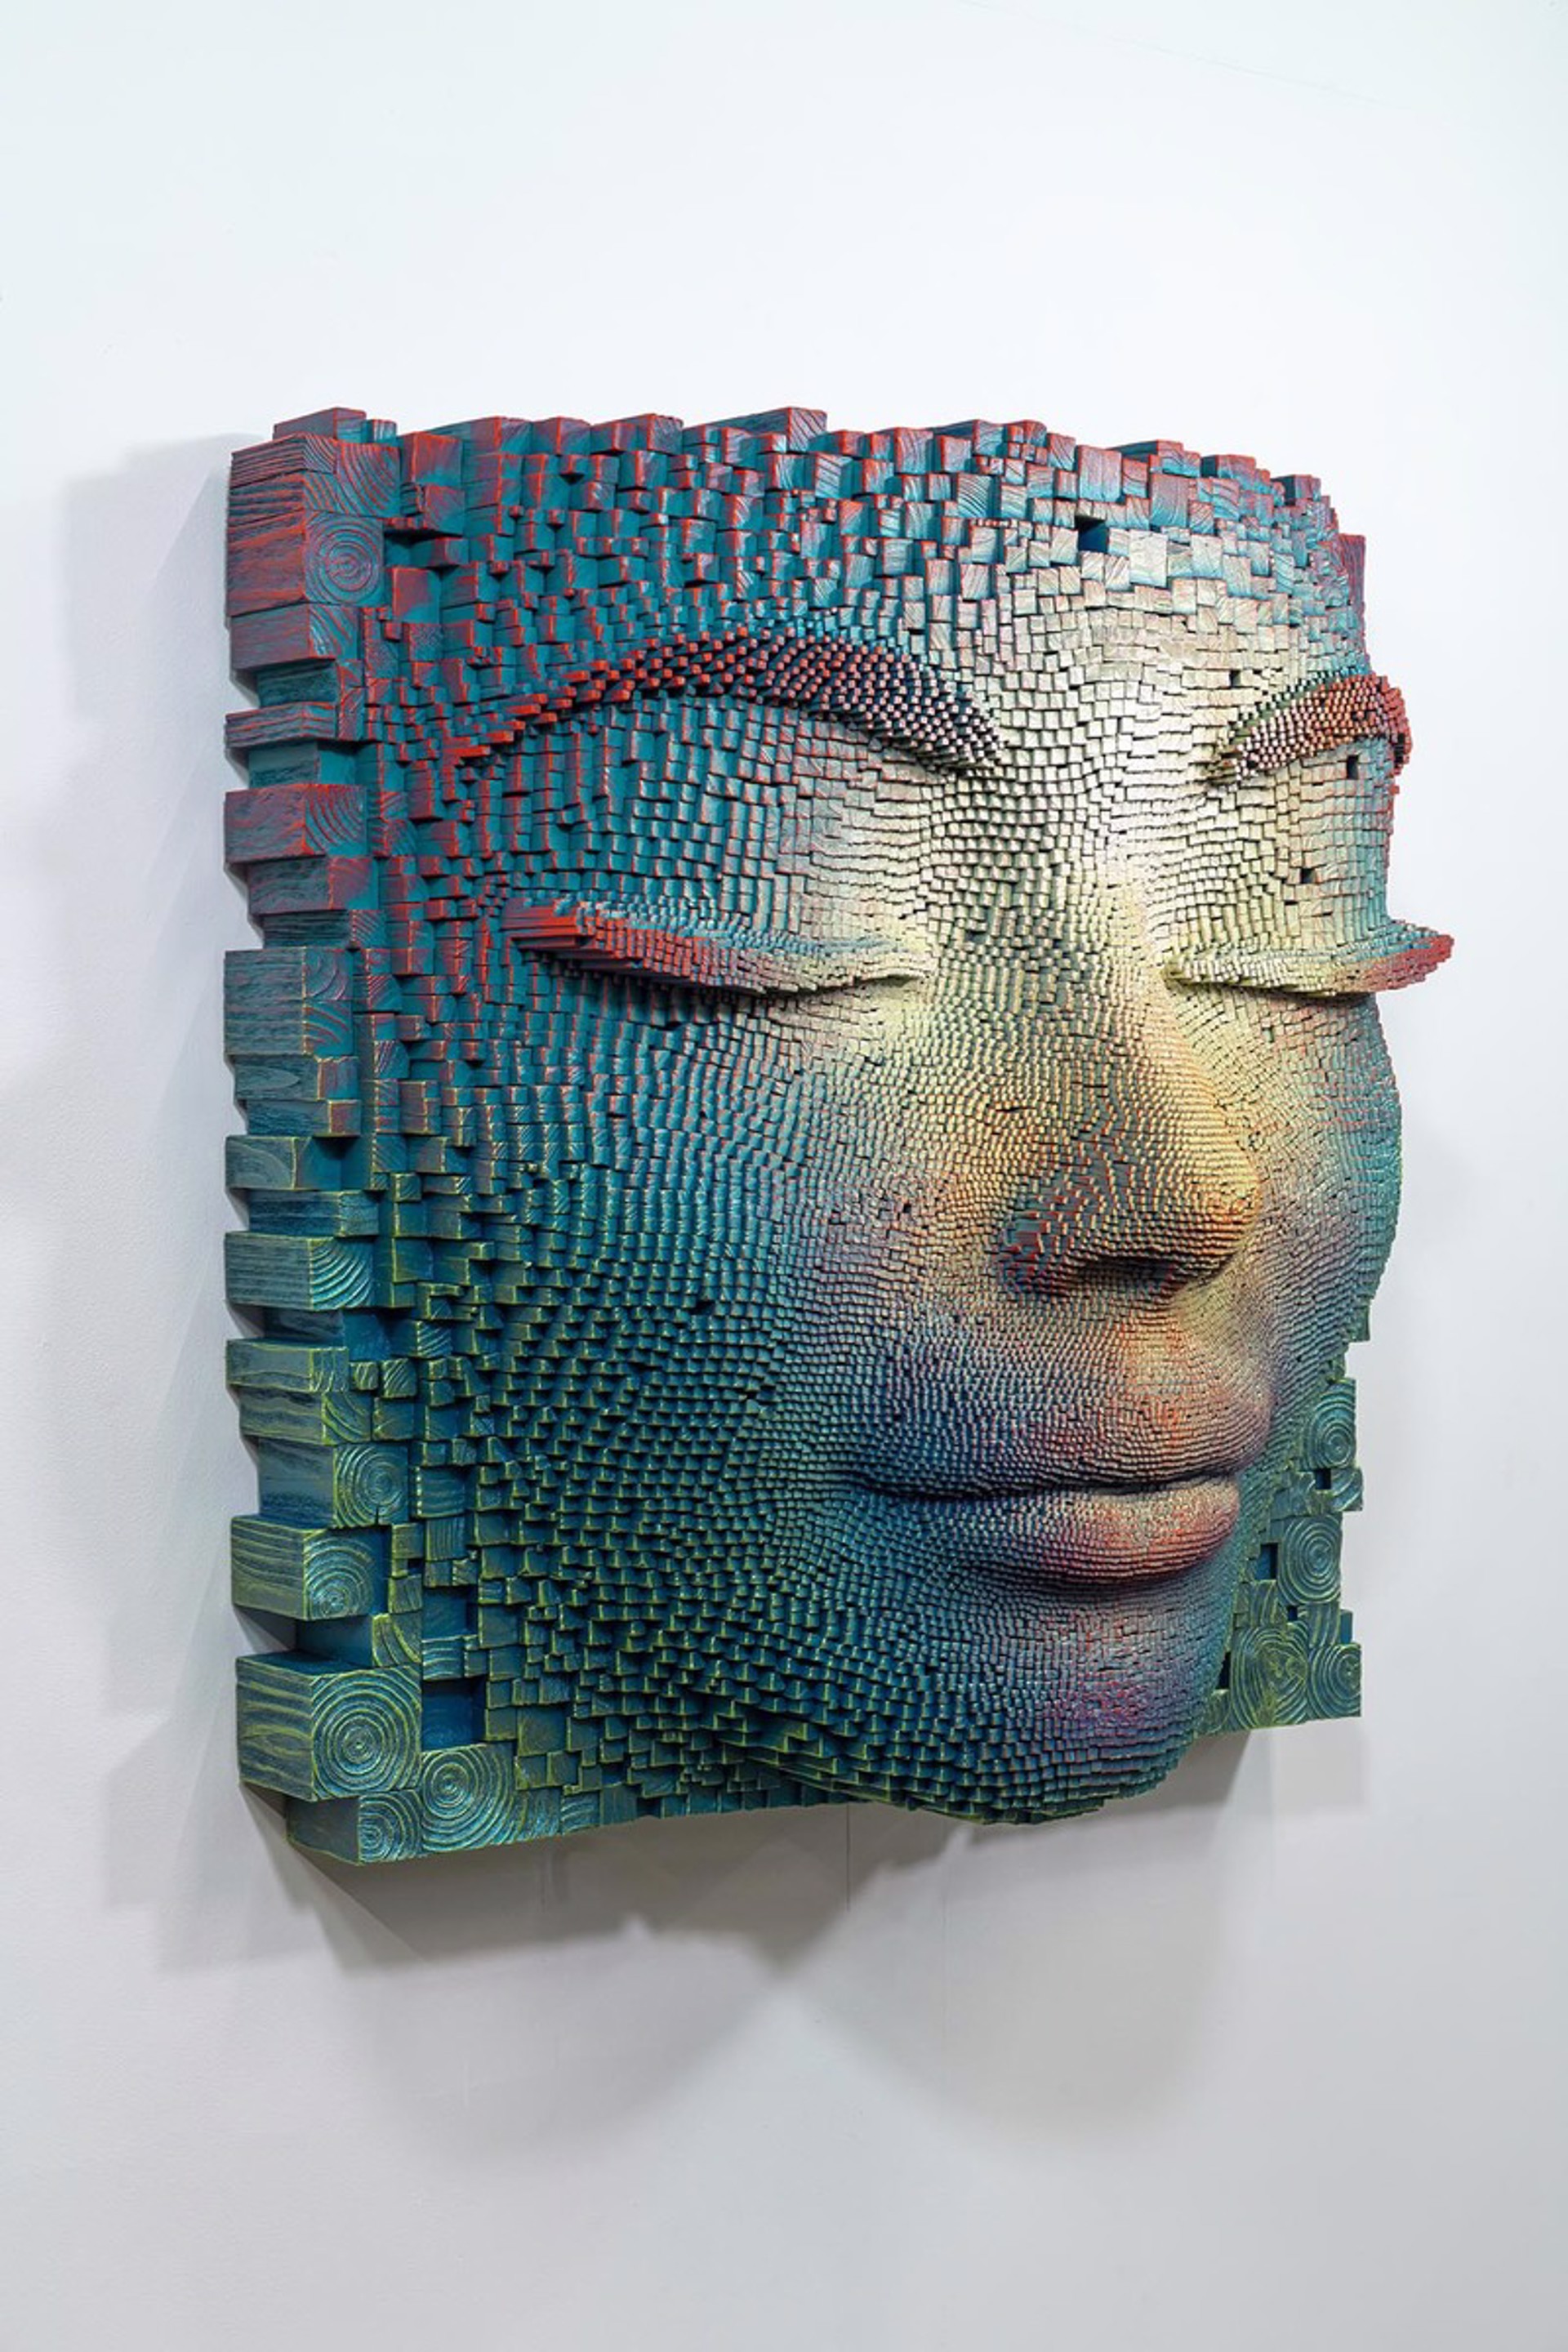 Mask #264 by Gil Bruvel